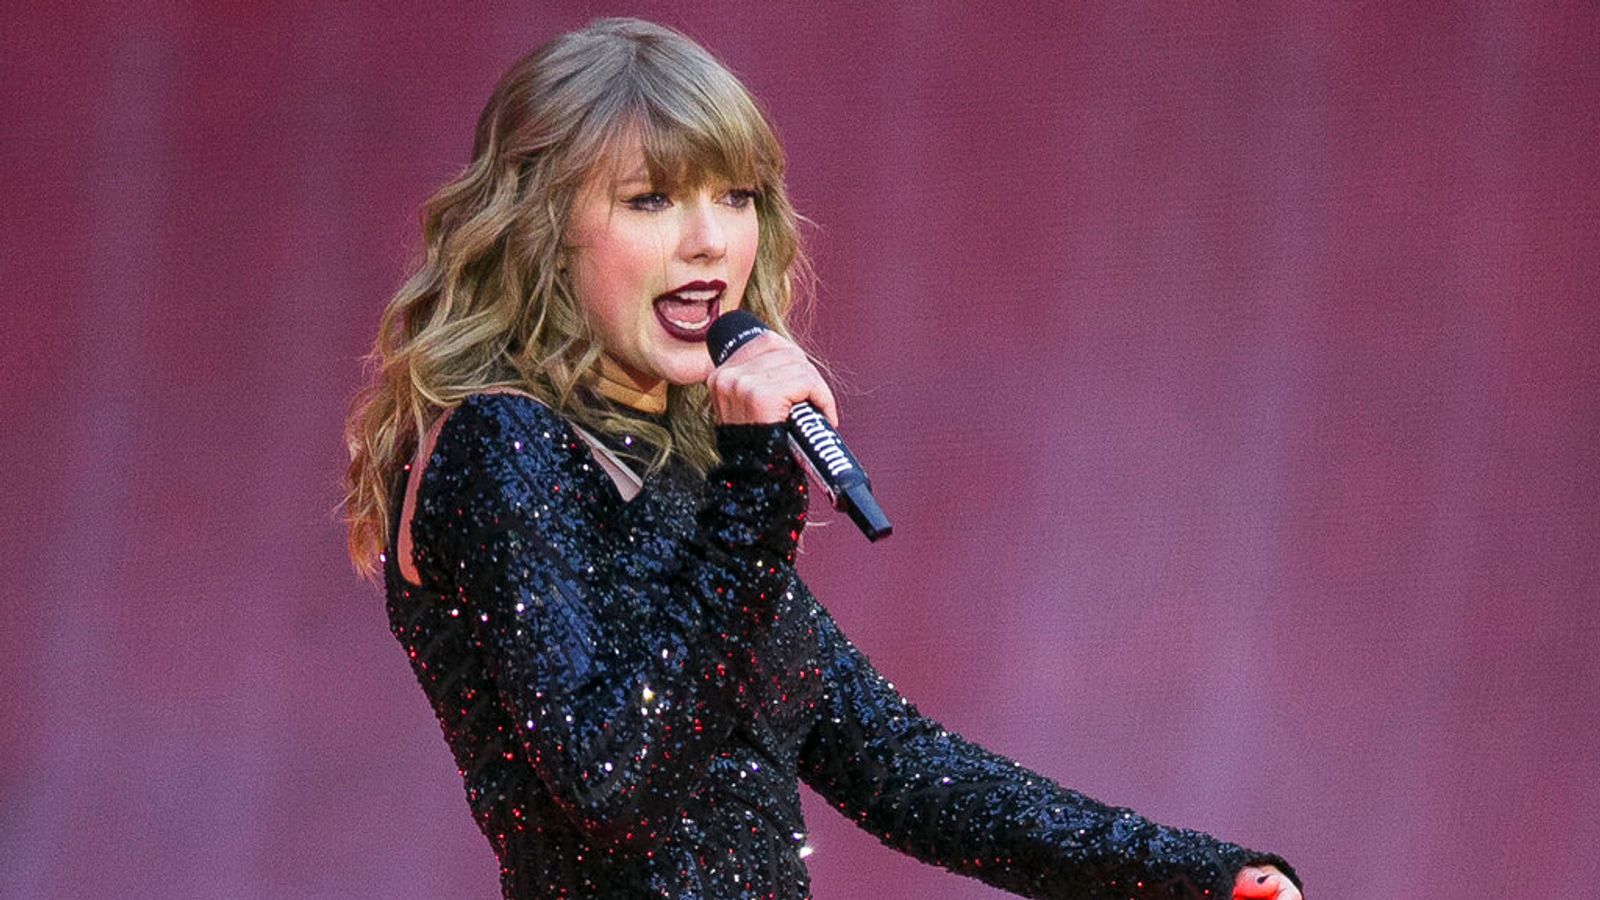 Taylor Swift: The Ticketmaster tour chaos explained - what happened and why is the US Senate involved?